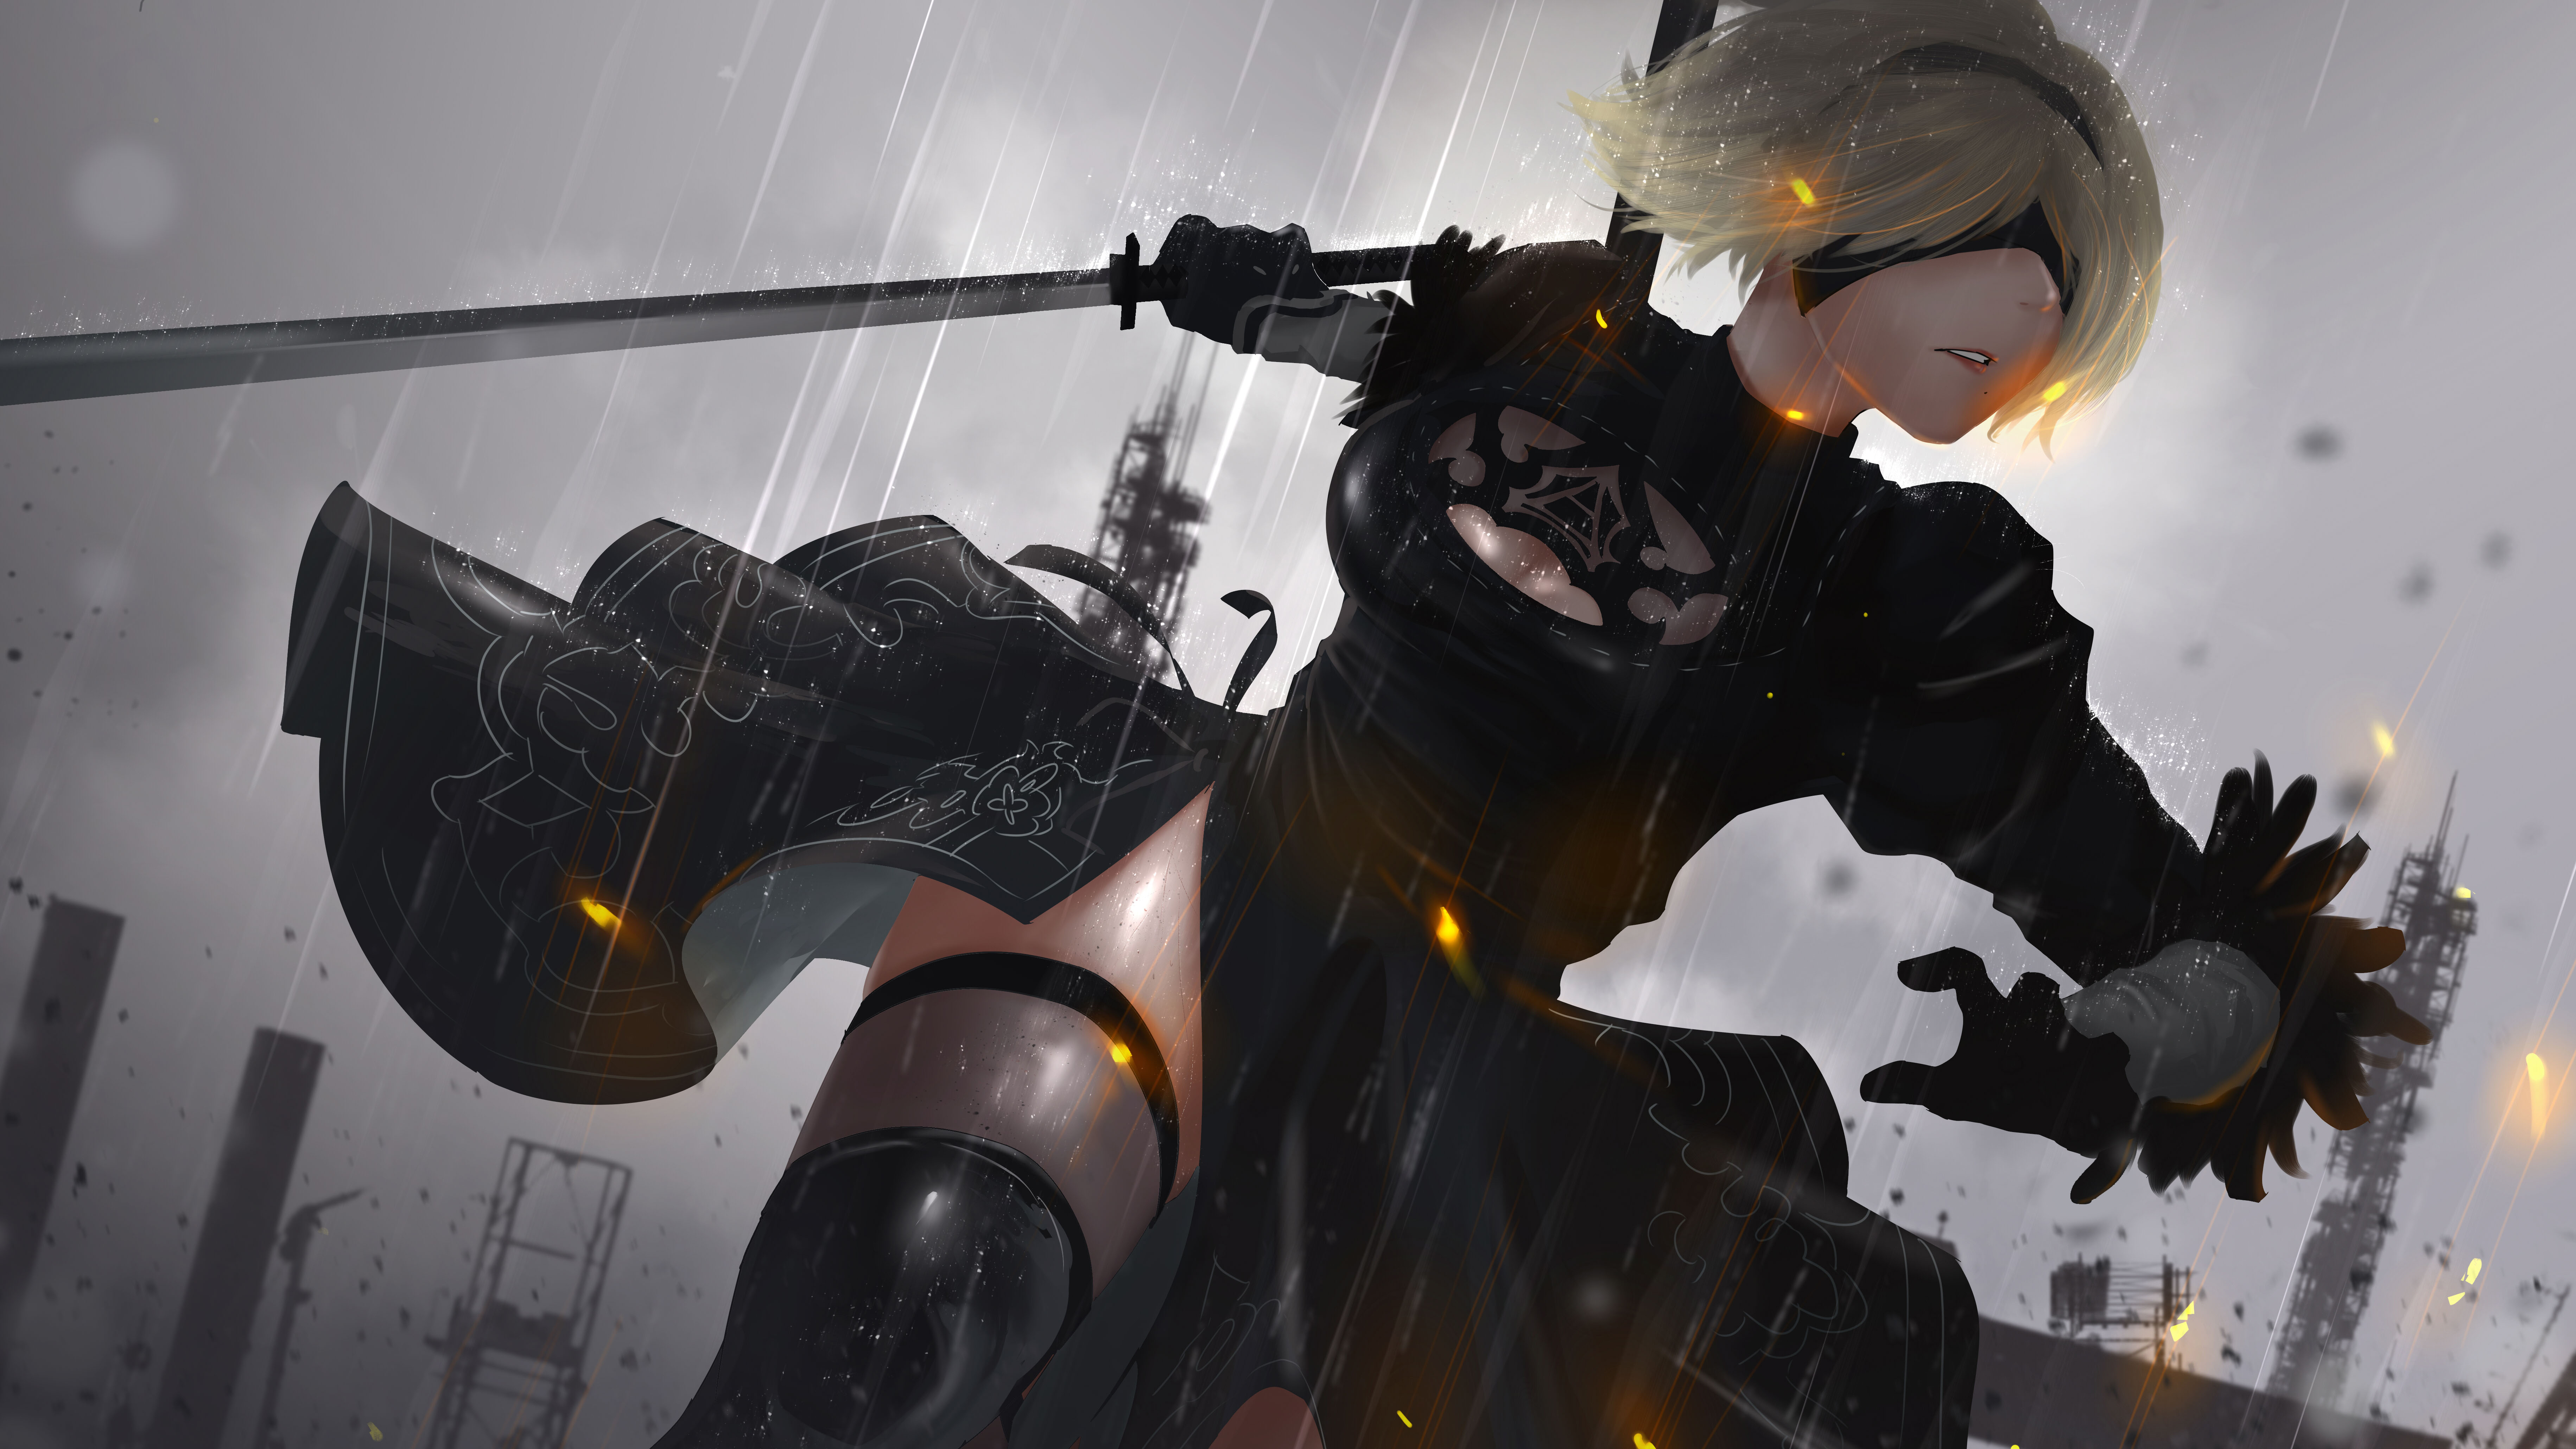 2B NieR Automata 8k, HD Games, 4k Wallpapers, Images, Backgrounds